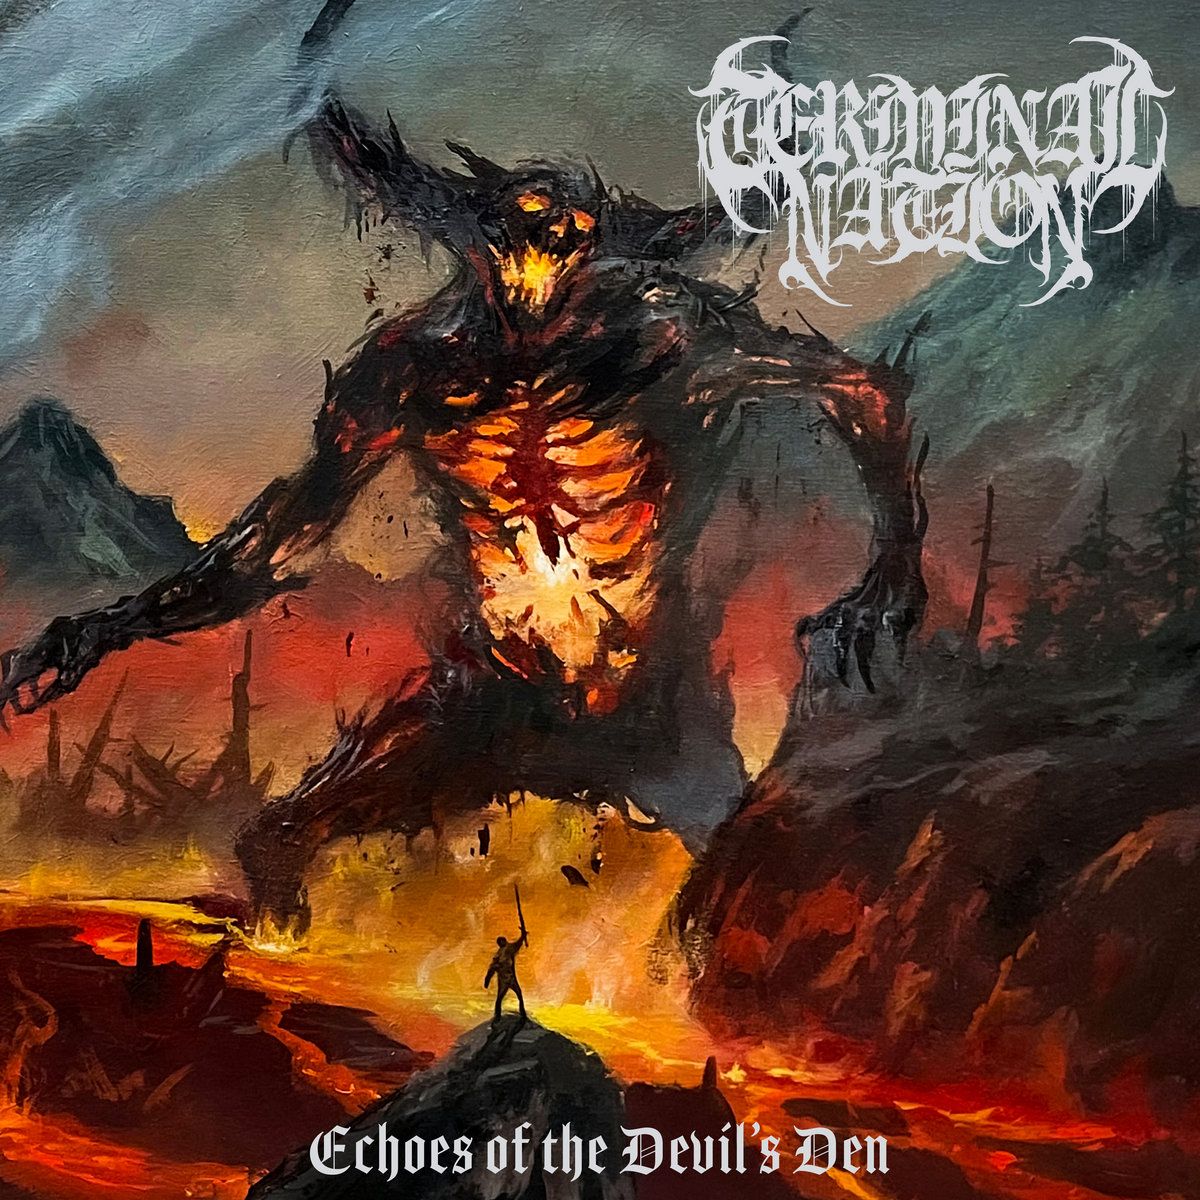 Hardcore Death Metallers TERMINAL NATION released their second studio album 'Echoes of the Devil's Den' on May 3, 2024 via 20Buckspin Label. How does this album compare to the band's debut? #terminalnation #echoesofthedevilsden #deathmetal @terminalnation @20buckspinlabel